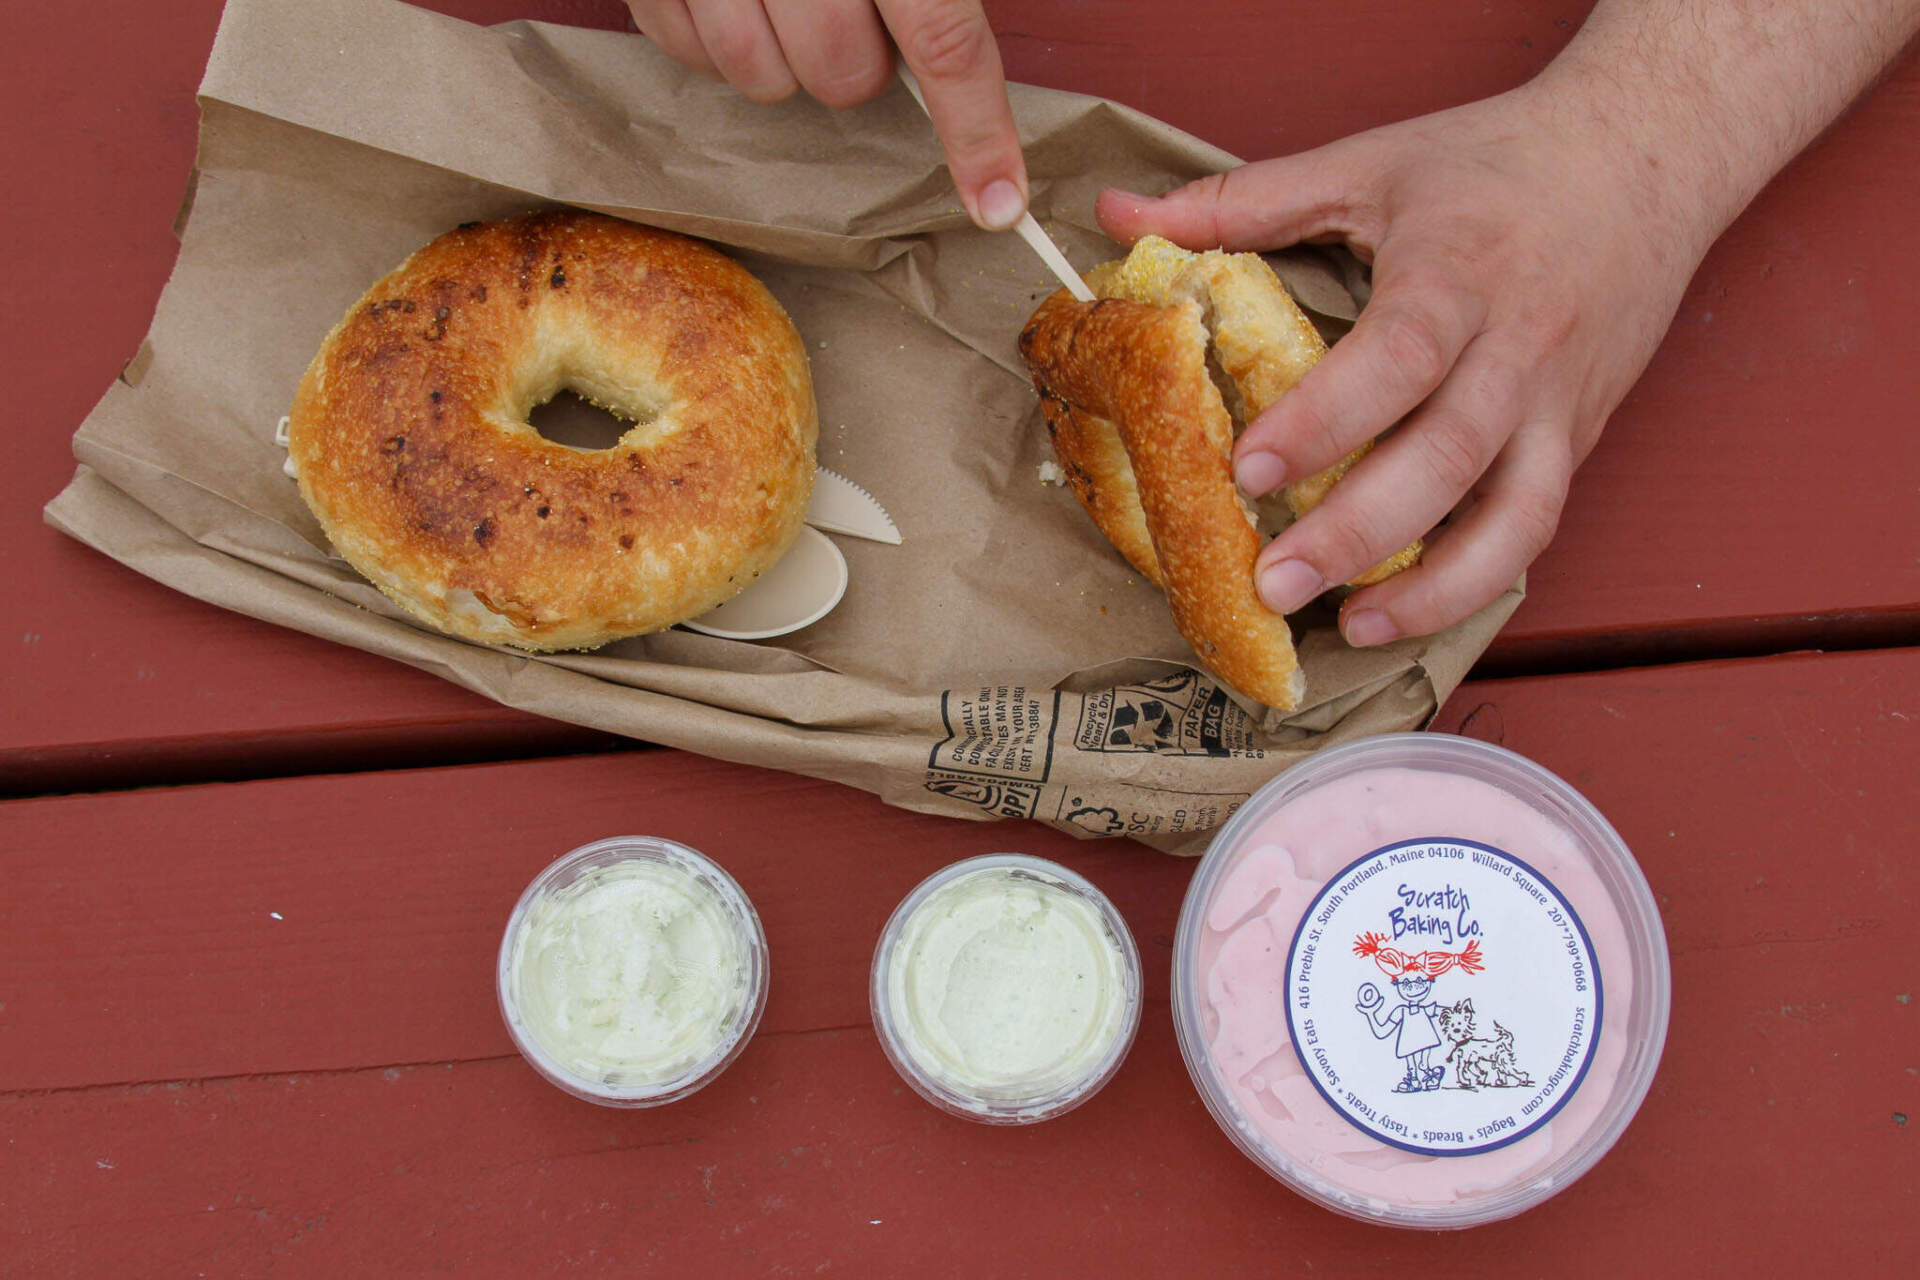 Scratch Baking Co Maine salt bagels and scream cheese spread. June 21. (Tulley Hescock/Maine Public)